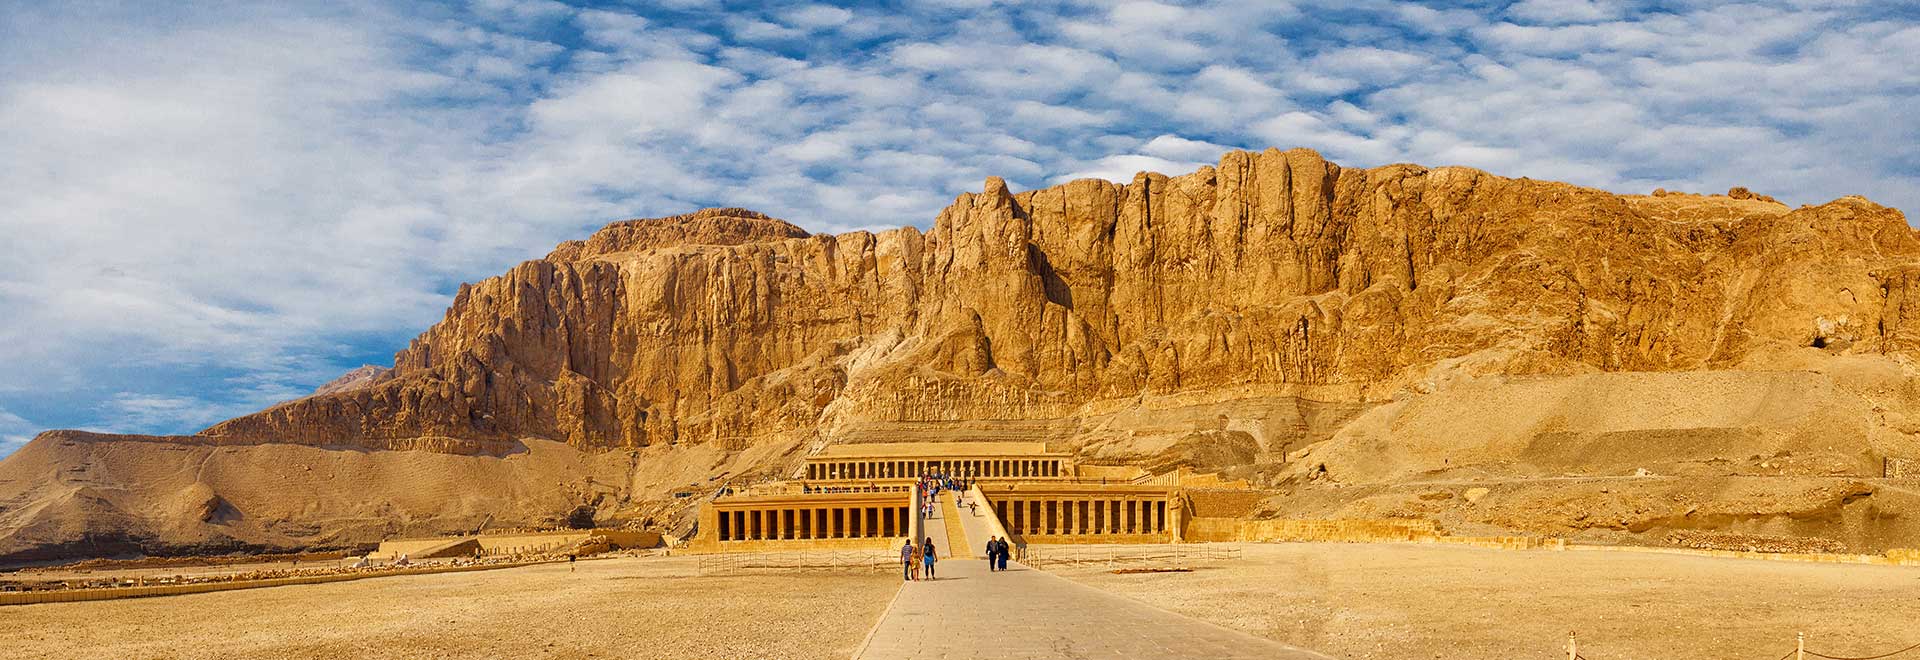 Middle East Egypt Temple Queen Hatshepsut MH seen on Luxury Egypt Tour